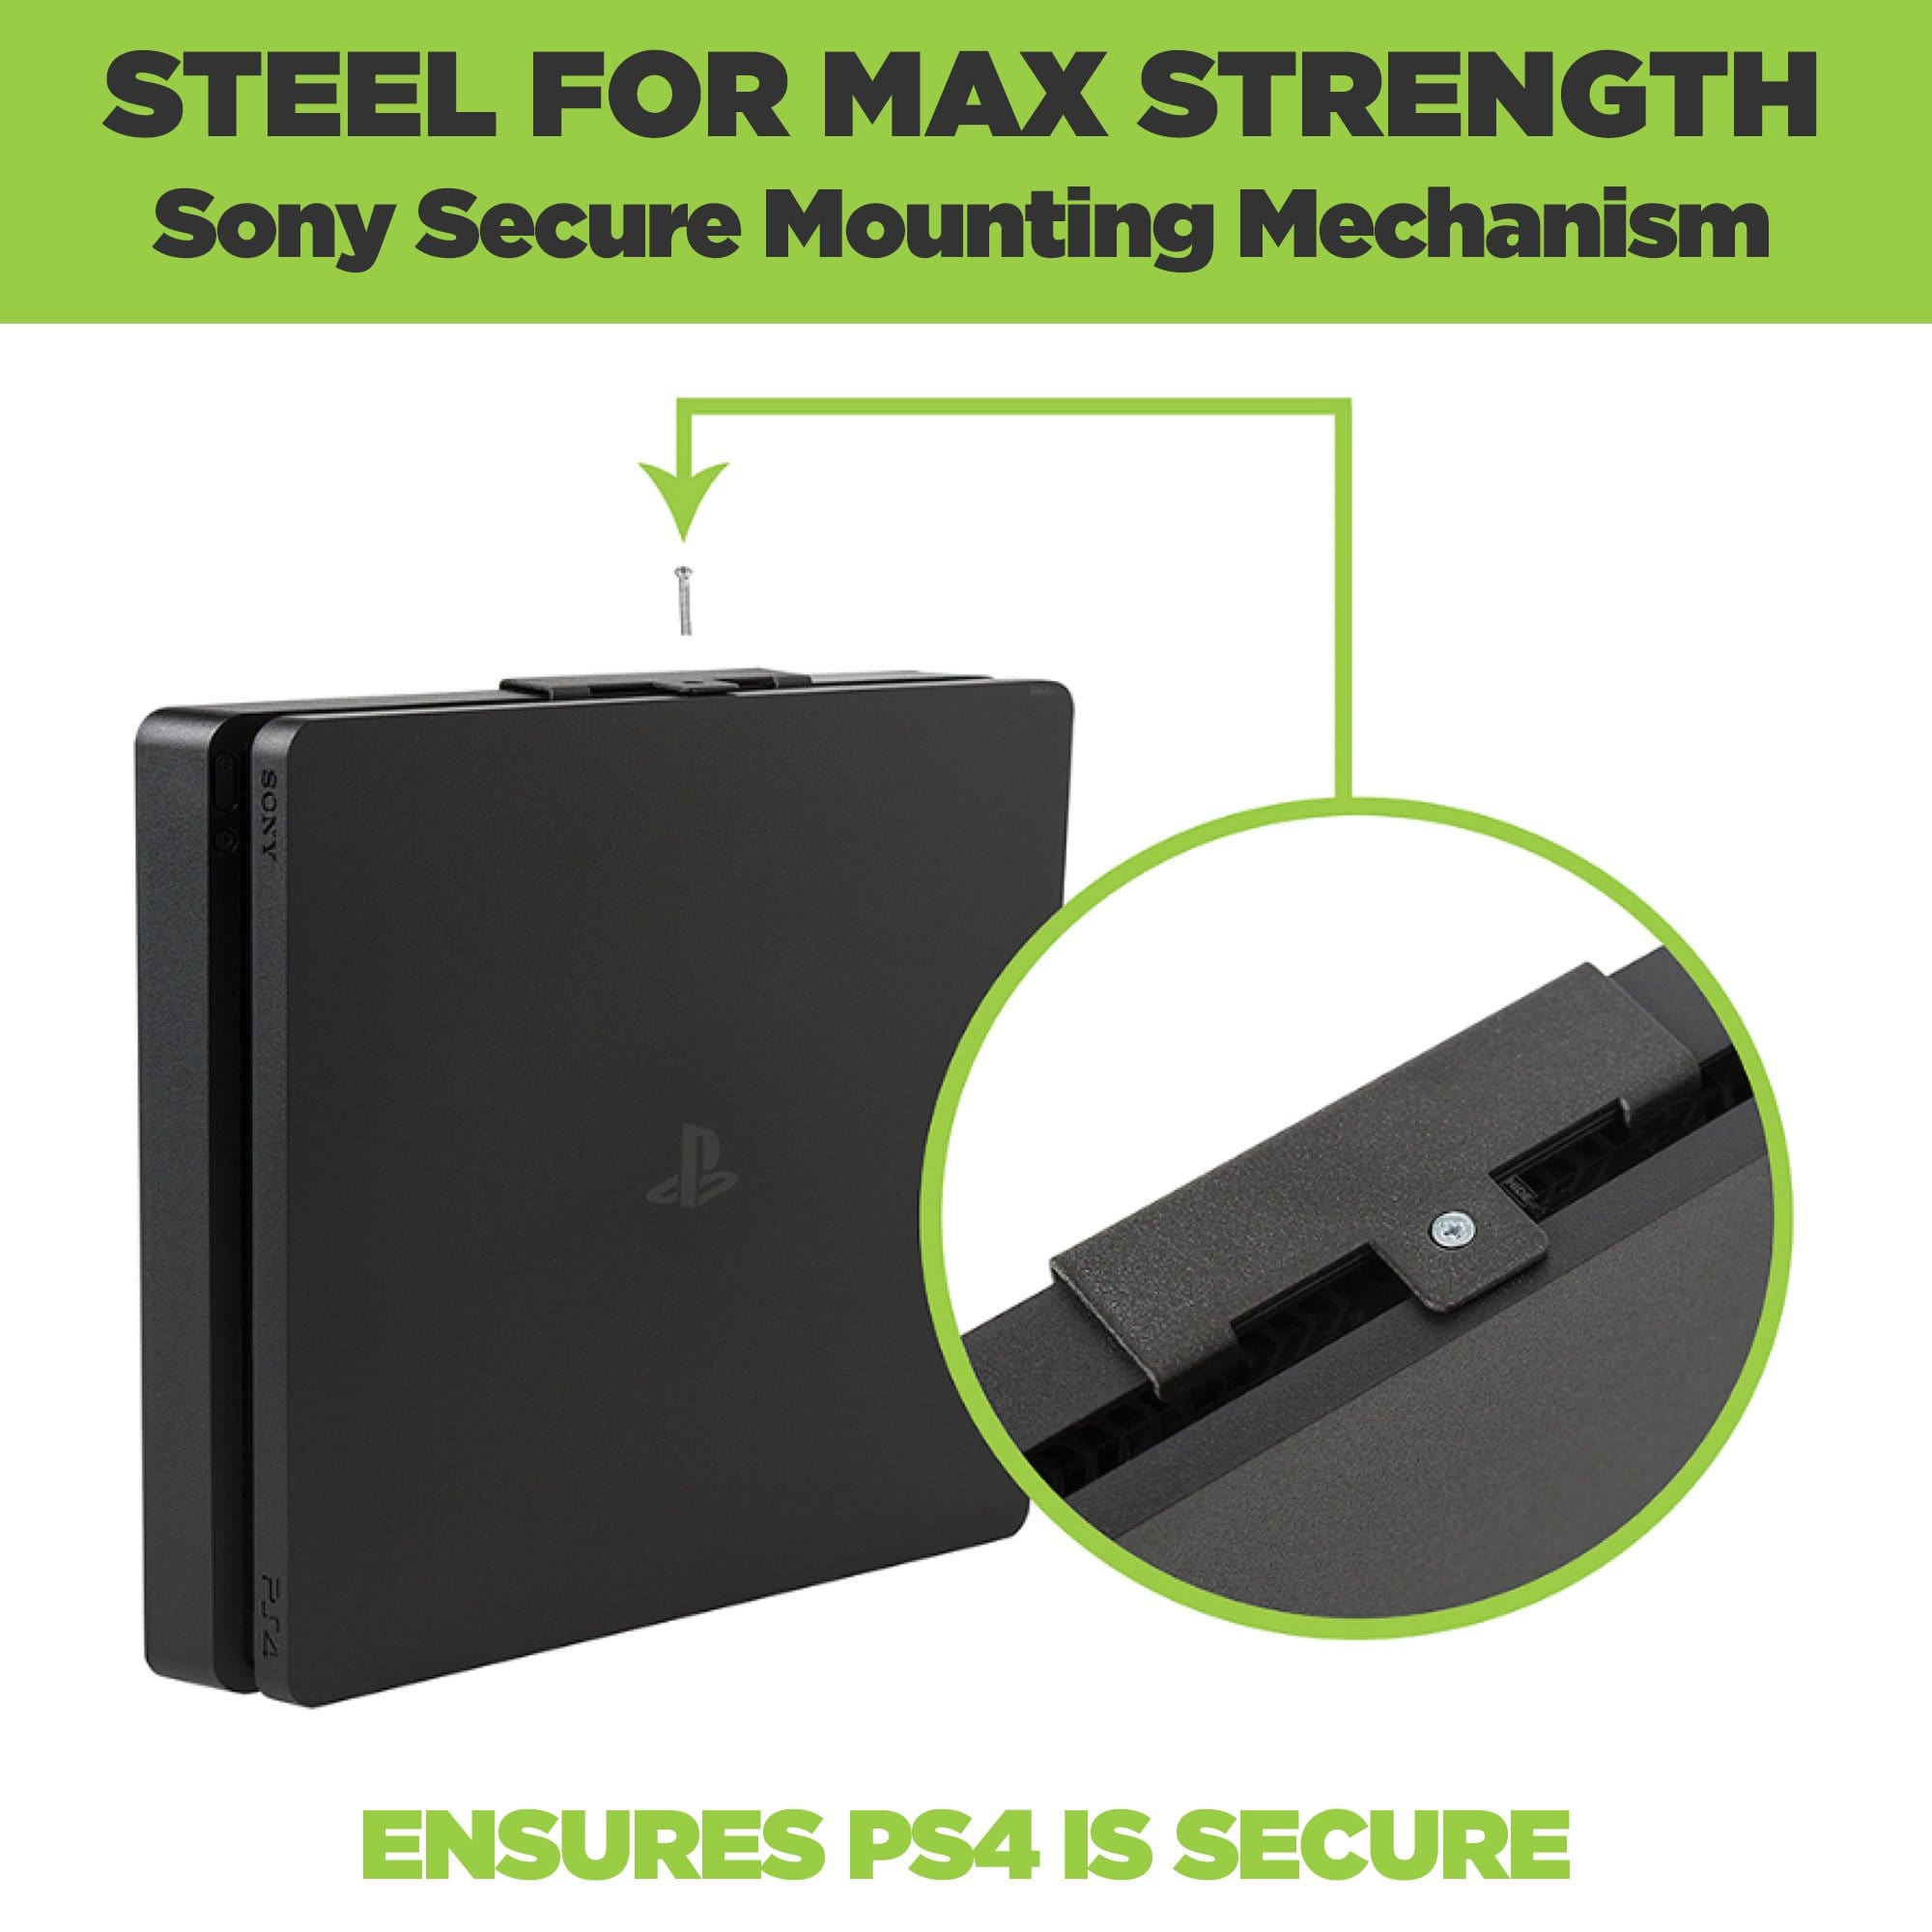 HIDEit wall mount for PS4 Slim, made from steel, allows easy access to ports.